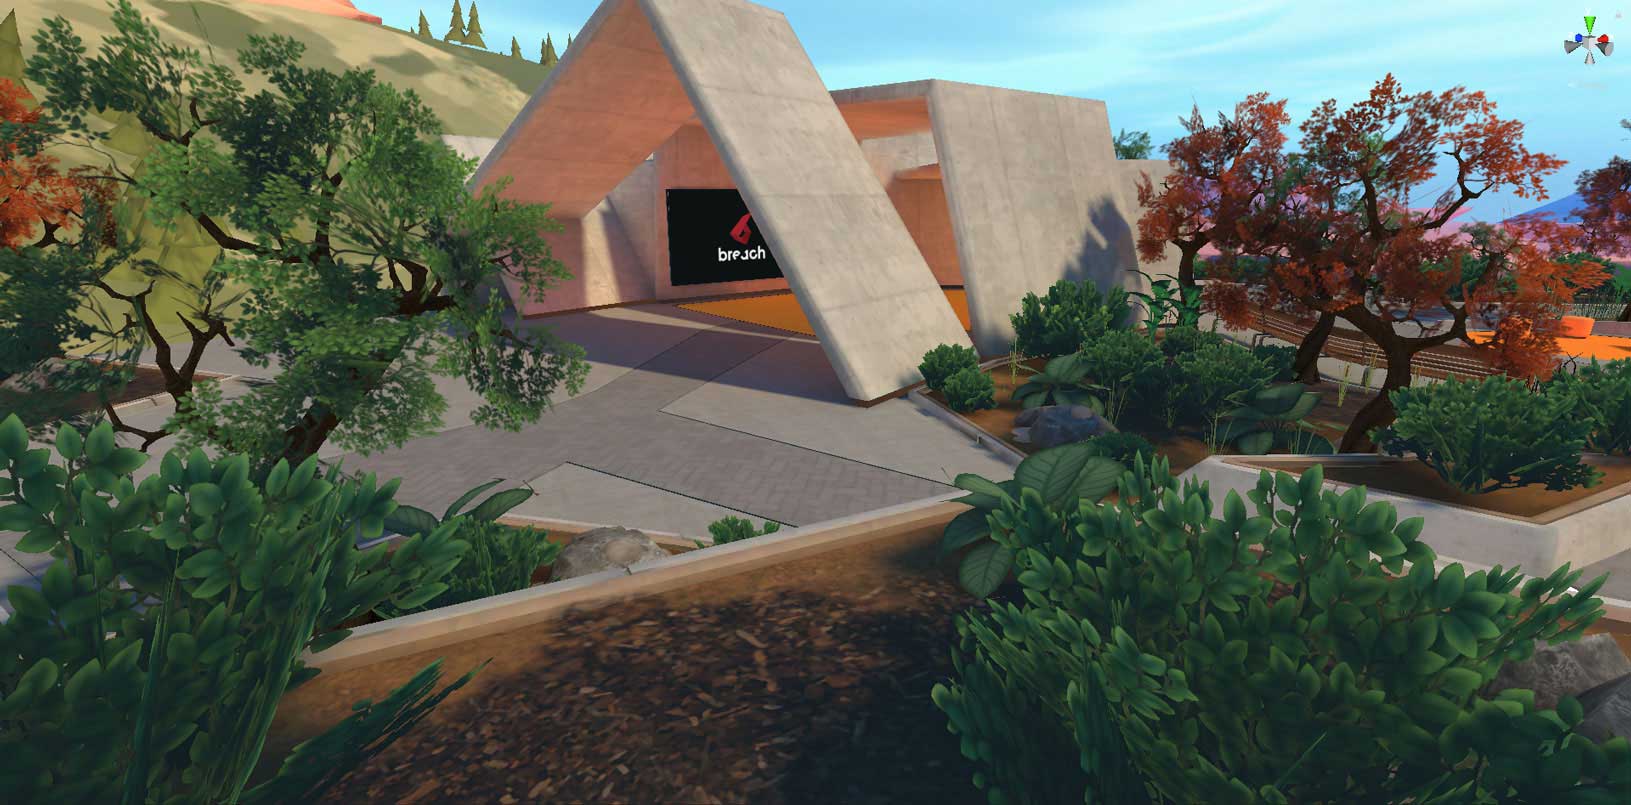 A 3D scene showing a presentation area located outside under open sky. The ground is paved and its shapes are broken up with flower beds. A large modern de-constructed cement tunnel is placed on the pavement.